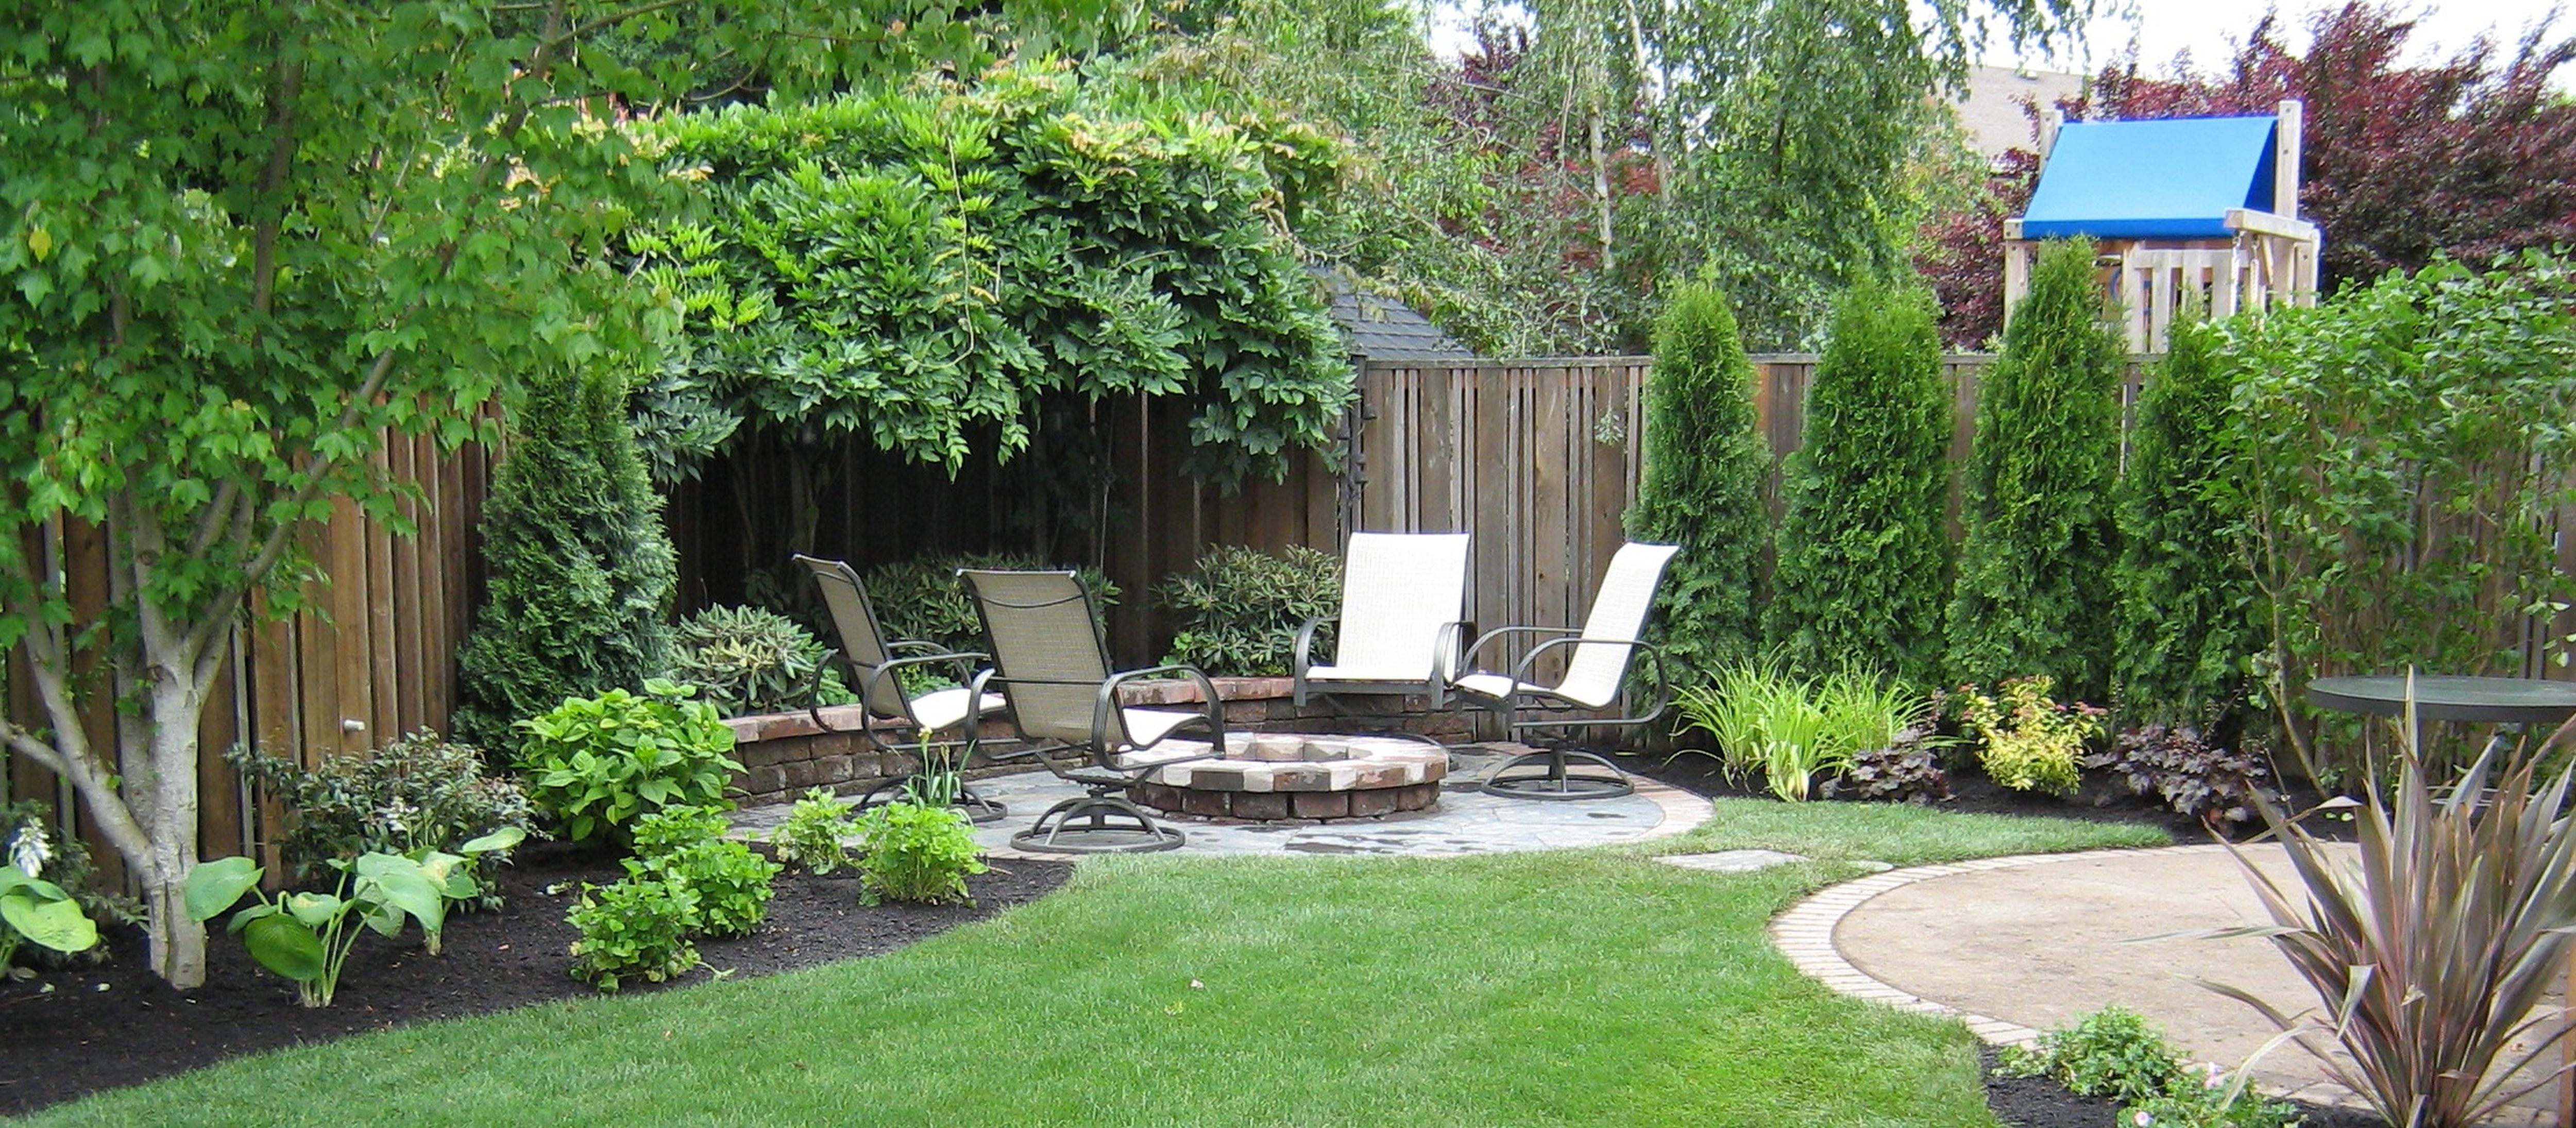 Amazing ideas for small backyard landscaping - Great Affordable ...